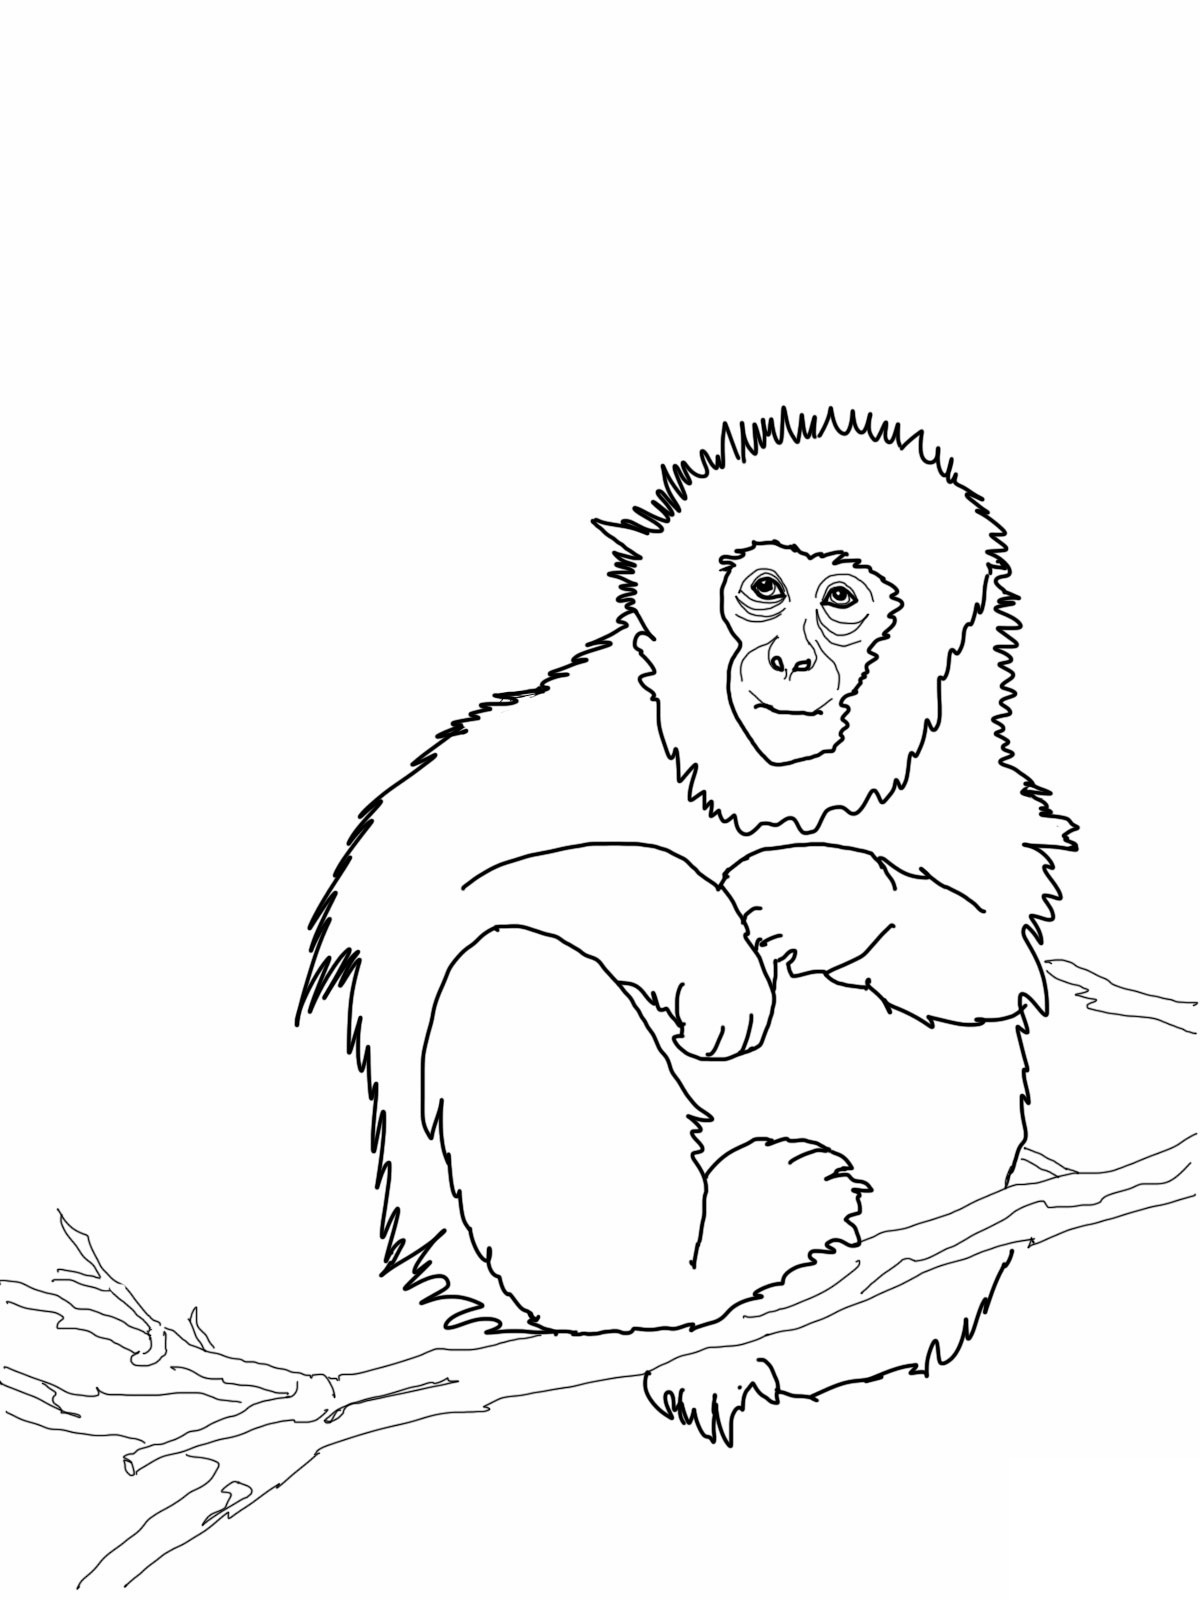 Drawing Animal Printable Coloring Pages For Kids